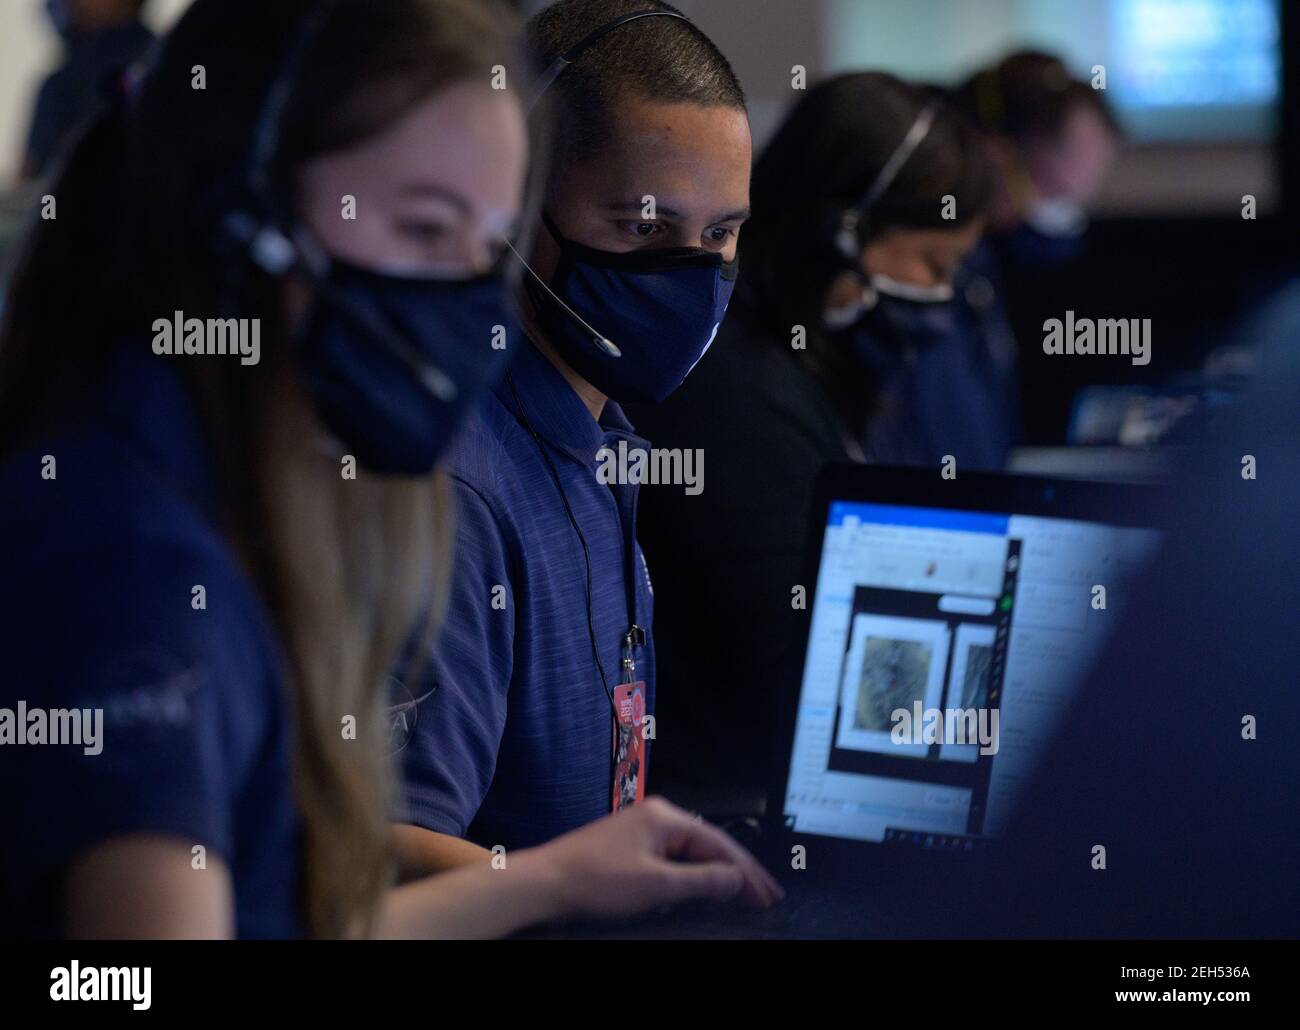 Pasadena, United States Of America. 18th Feb, 2021. Members of the NASA Perseverance Mars rover mission team watch data on monitors during the landing phase in mission control at the NASA Jet Propulsion Laboratory February 18, 2021 in Pasadena, California. The Perseverance Mars rover landed successfully and immediately began sending images from the surface of the Red Planet. Credit: Planetpix/Alamy Live News Stock Photo